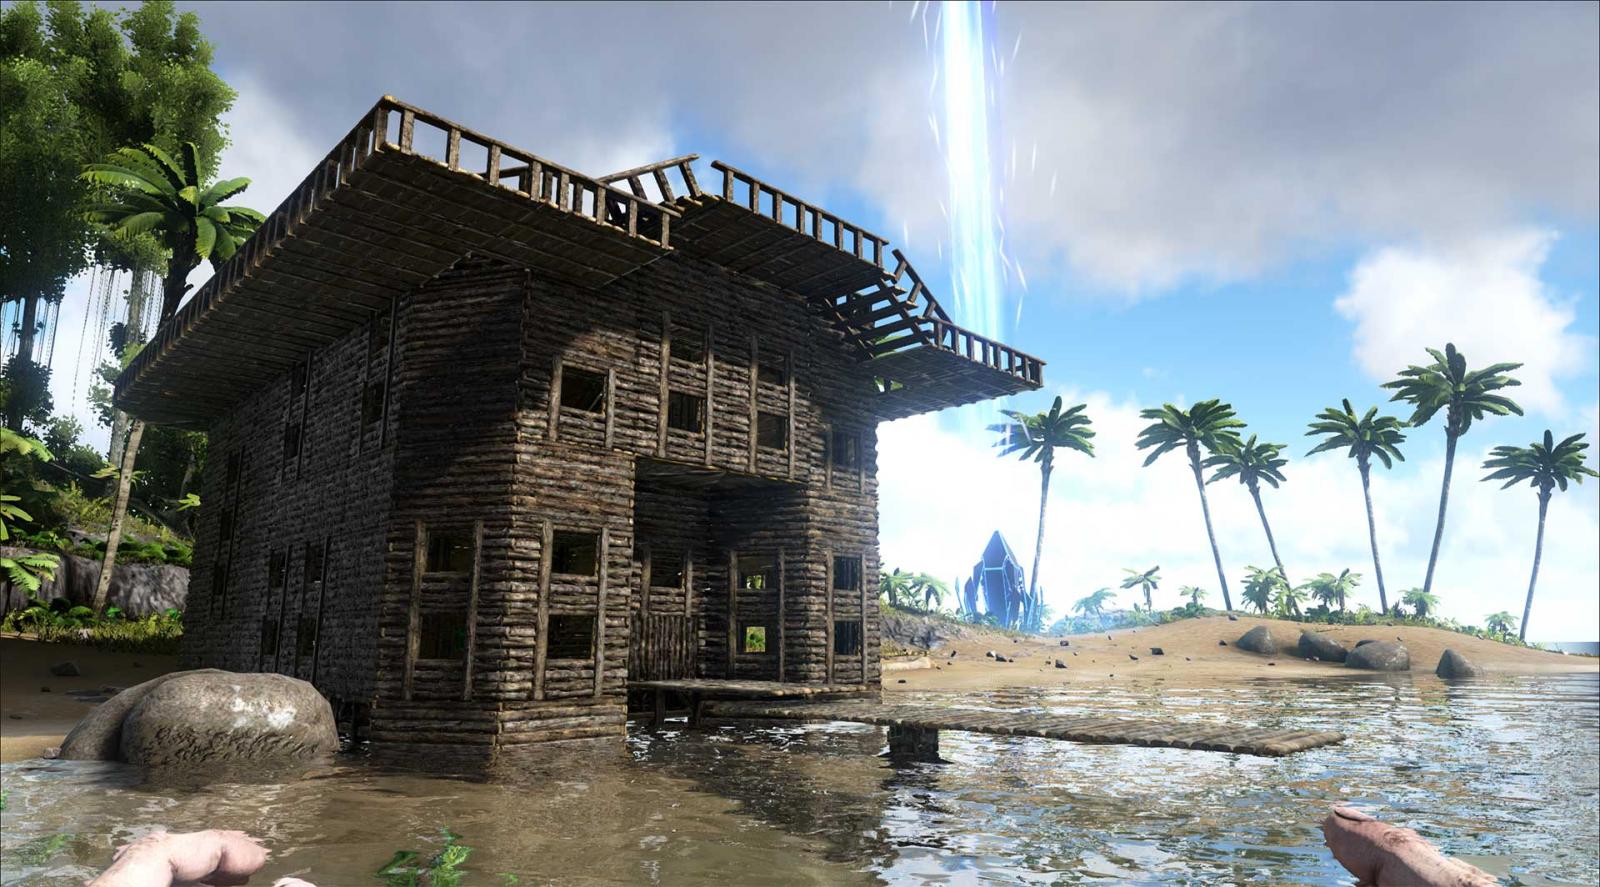 Ark Survival Evolved The Beta For Structures Plus And The Kibble Rework Is Now Live Please See The Following Announcement Post To Learn How To Take Part In This Pc